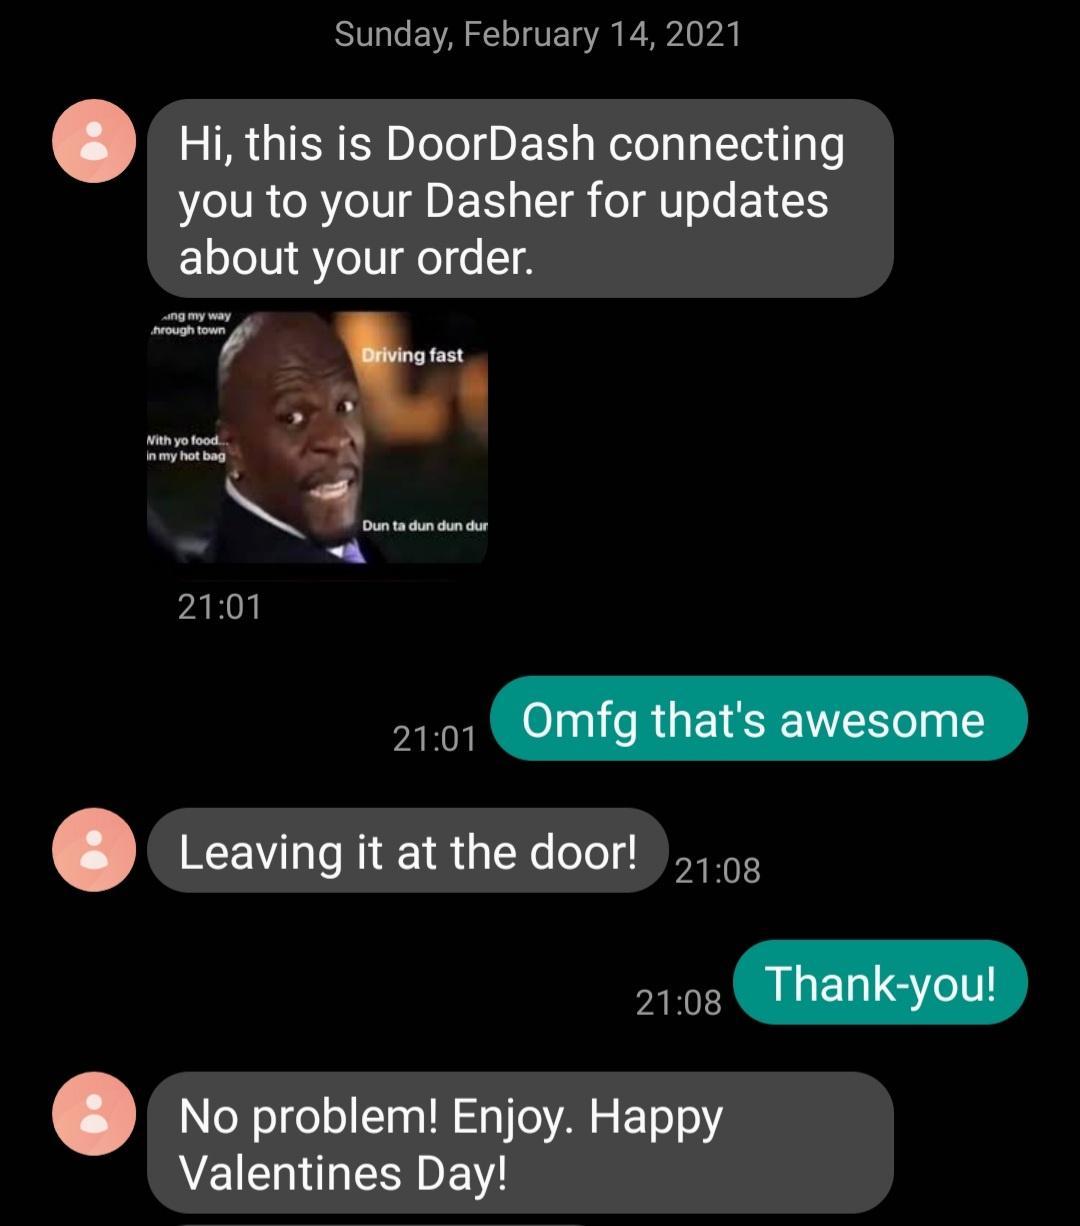 funny memes - multimedia - Sunday, Hi, this is DoorDash connecting you to your Dasher for updates about your order. Ang my way through town Driving fast Nith yo food. in my hot bag Dun ta dun dun dur Omfg that's awesome Leaving it at the door! Thank you! 